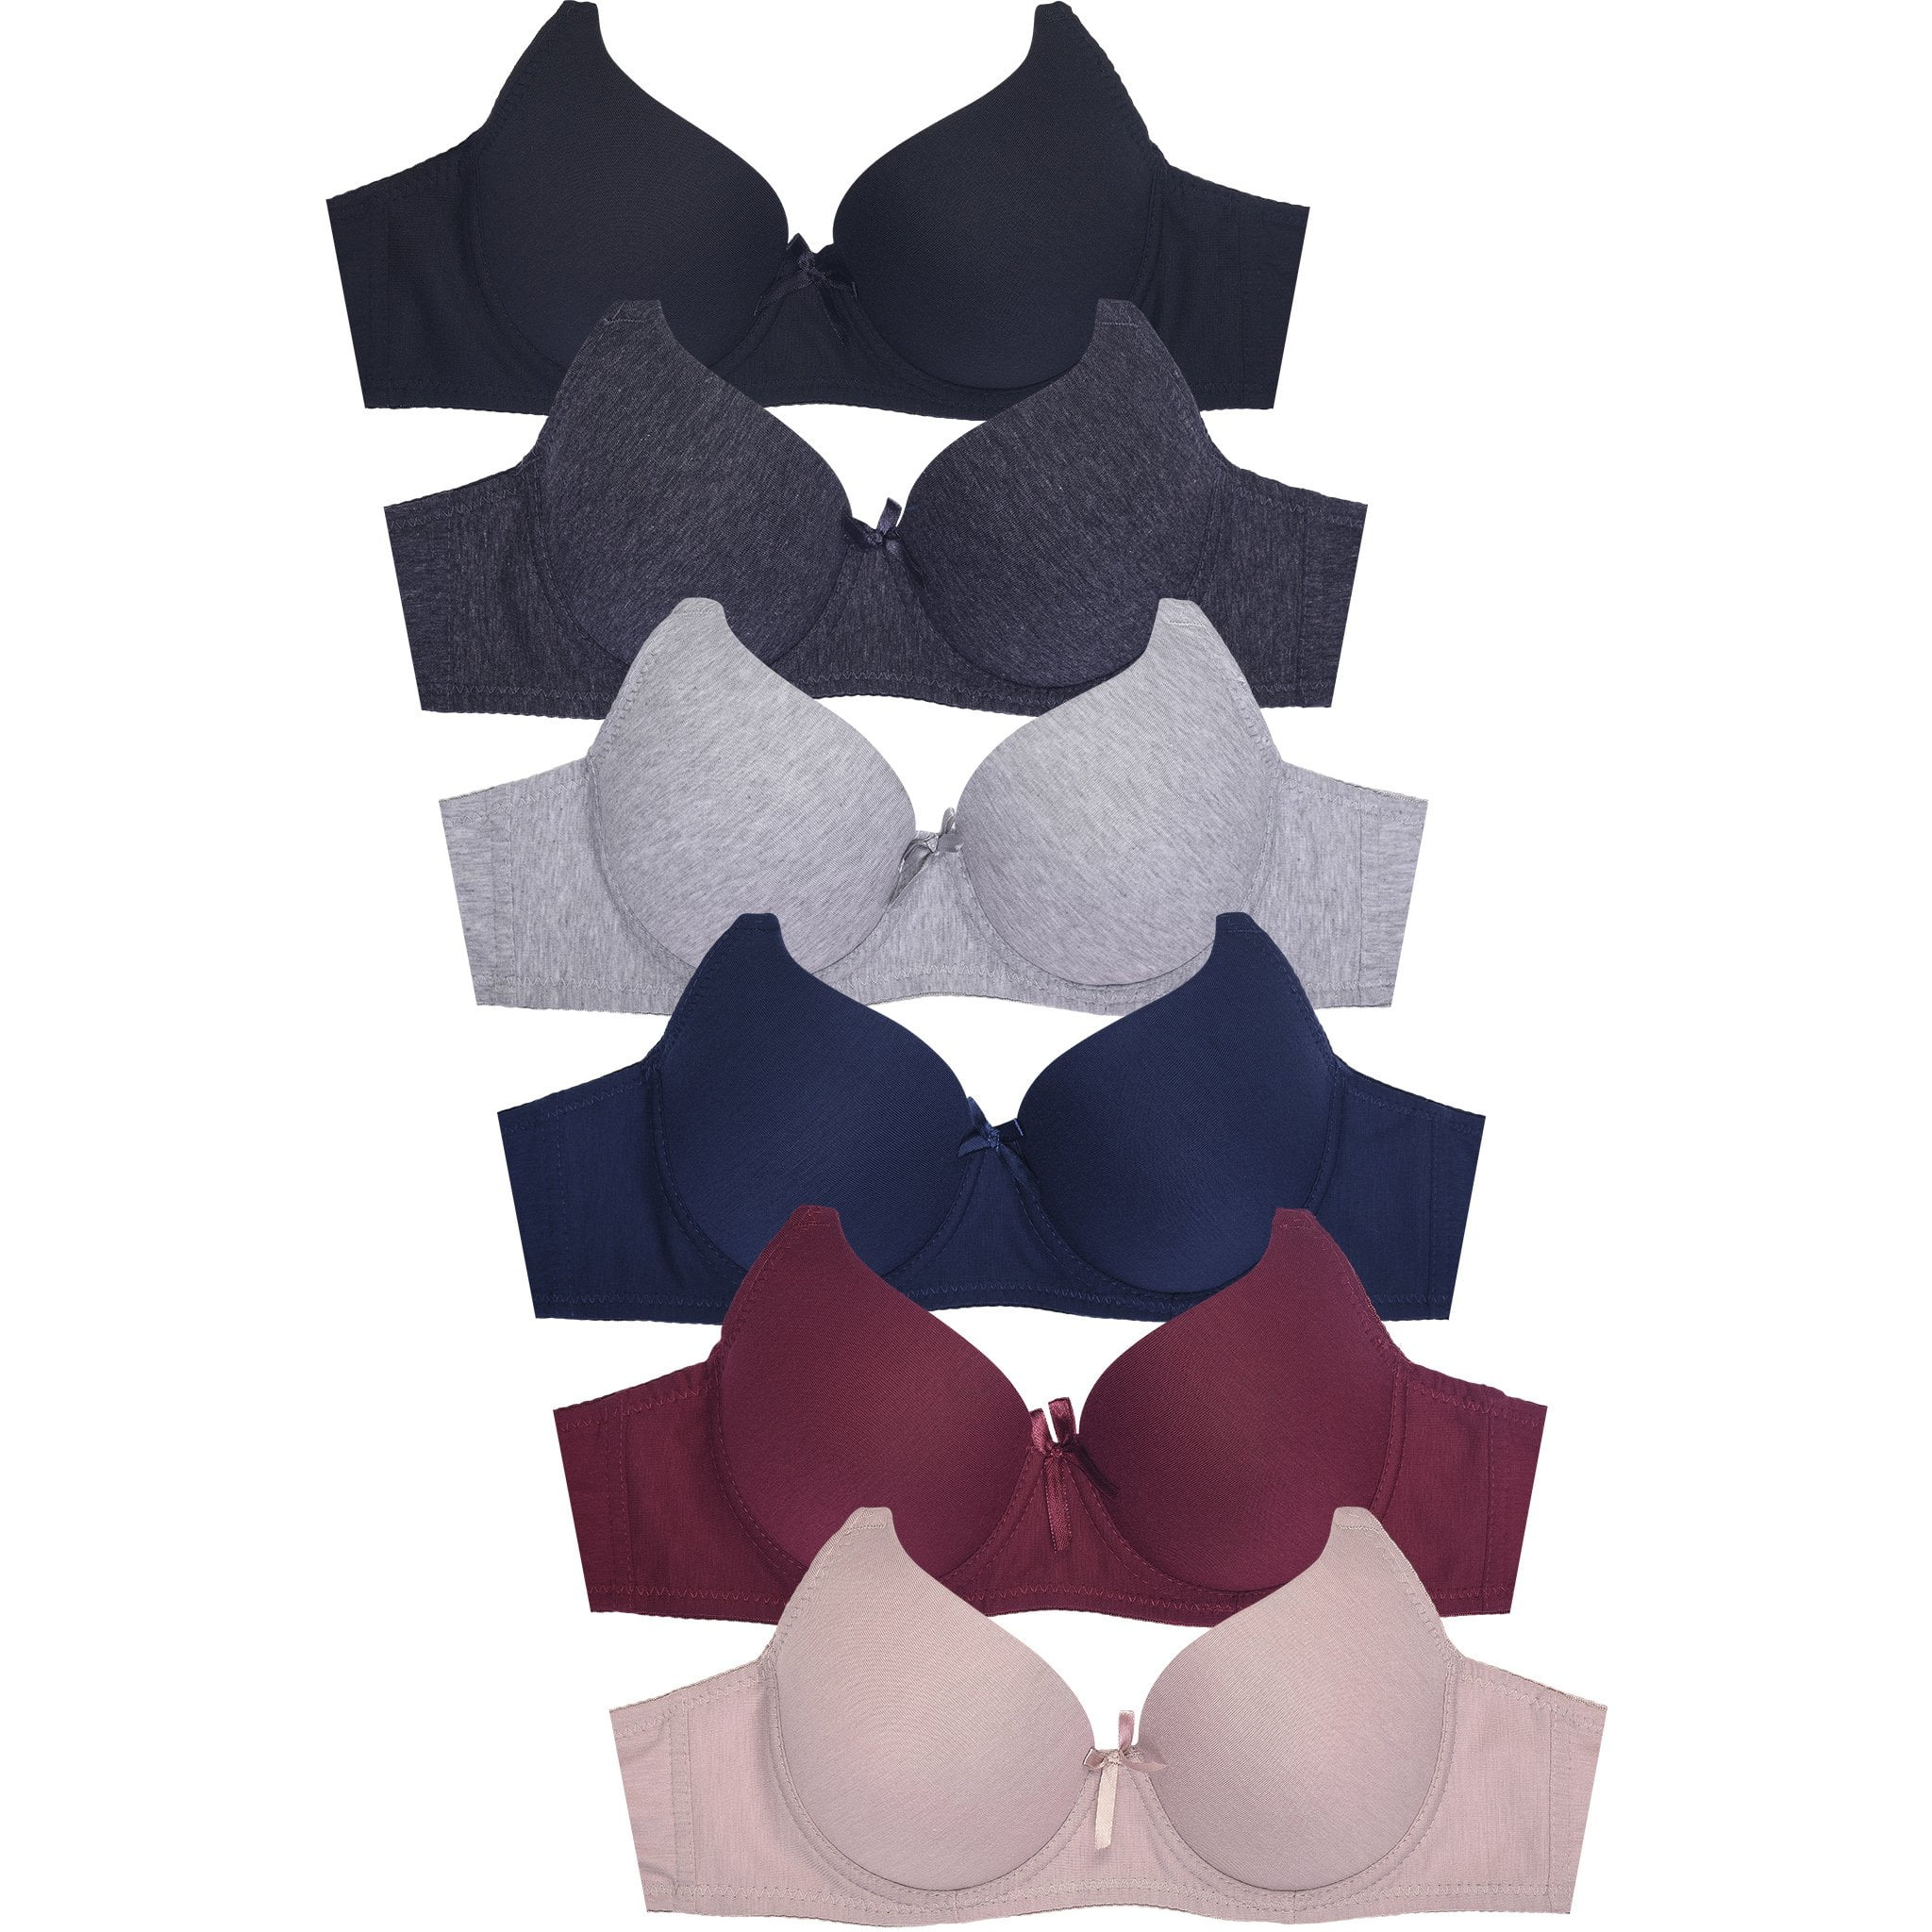 Womens 6 Pack of Everyday Plain, Lace, D, DD, DDD Cup Bra -Various Style  4161L3D4, 40DD 